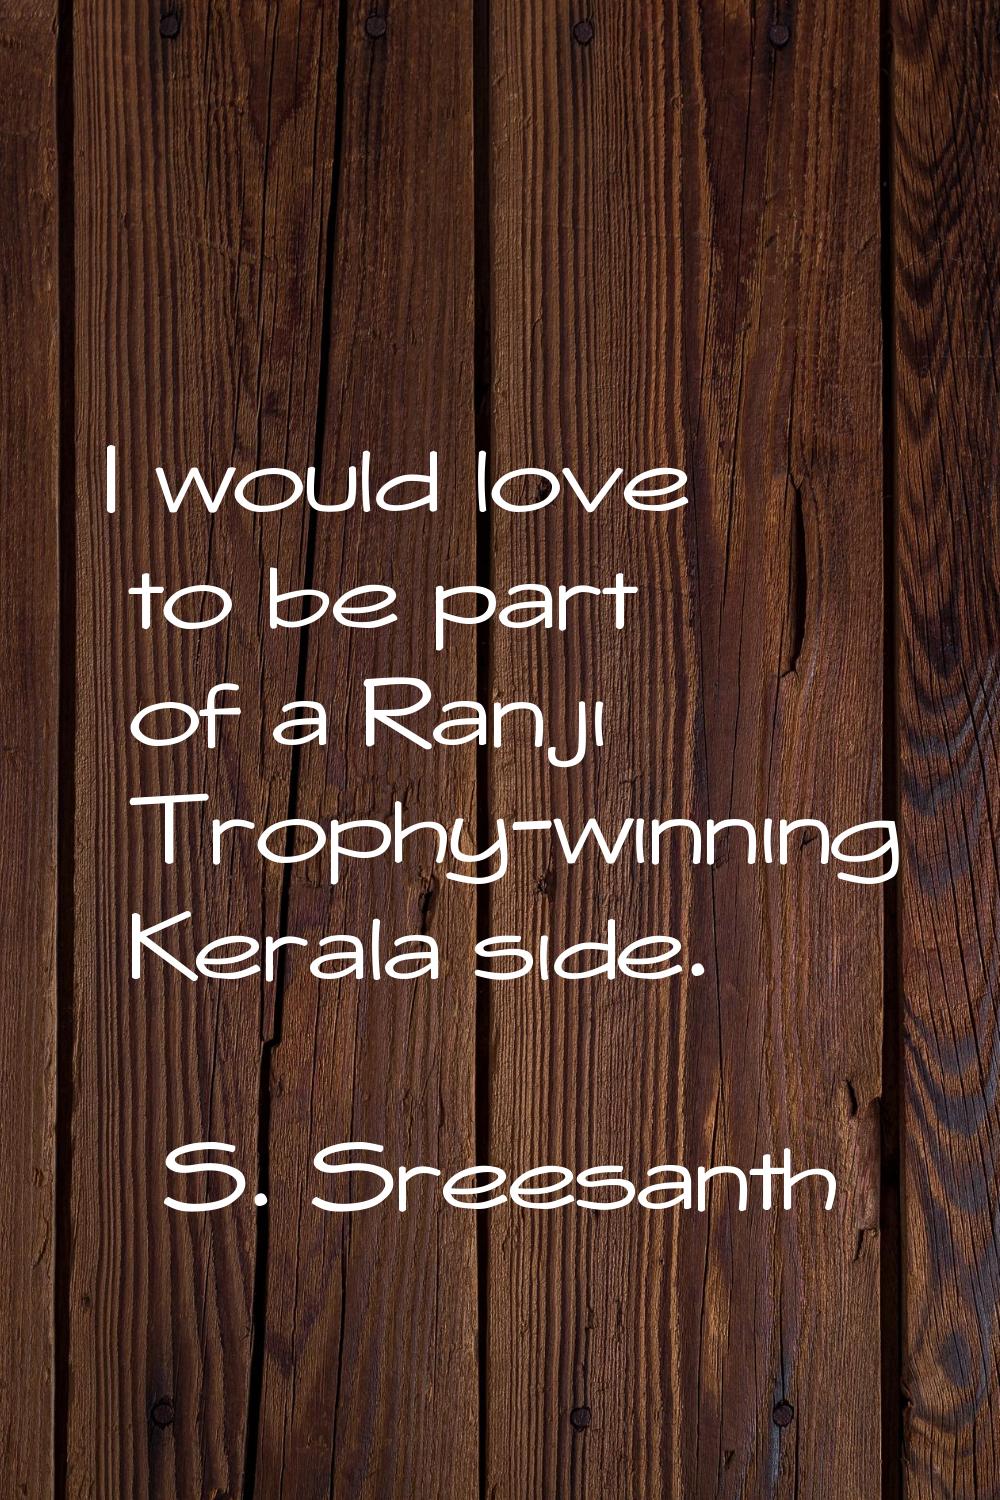 I would love to be part of a Ranji Trophy-winning Kerala side.